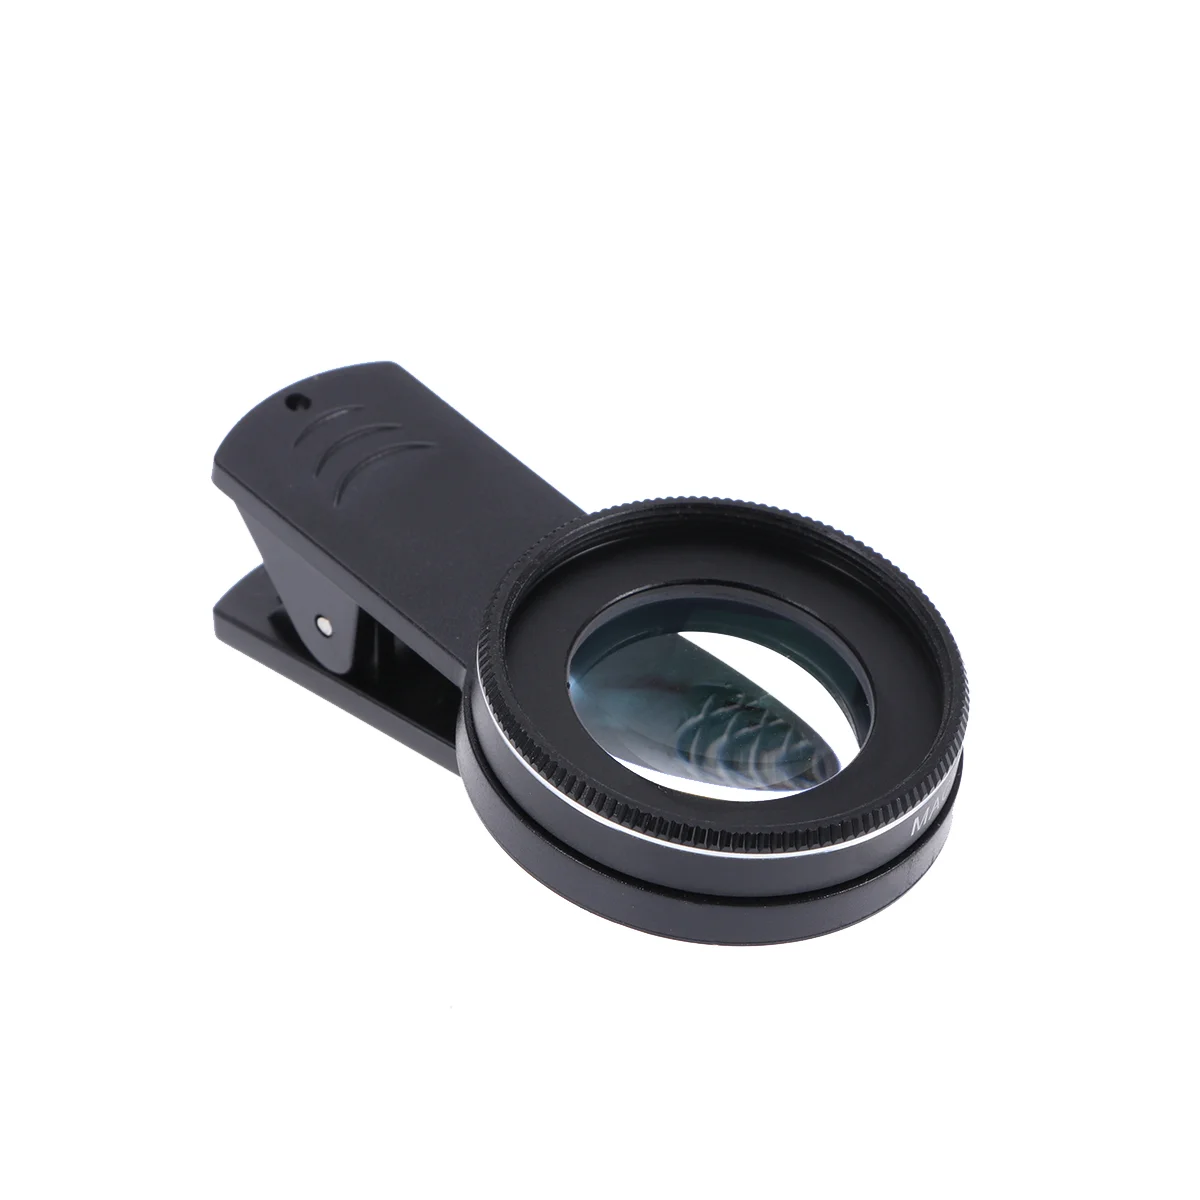 

Lenscamera Cellcellphone Fisheye Macro Eyesmartphone 15Xtelephoto Clip Attachments Magnifying Optic External Wide Angle